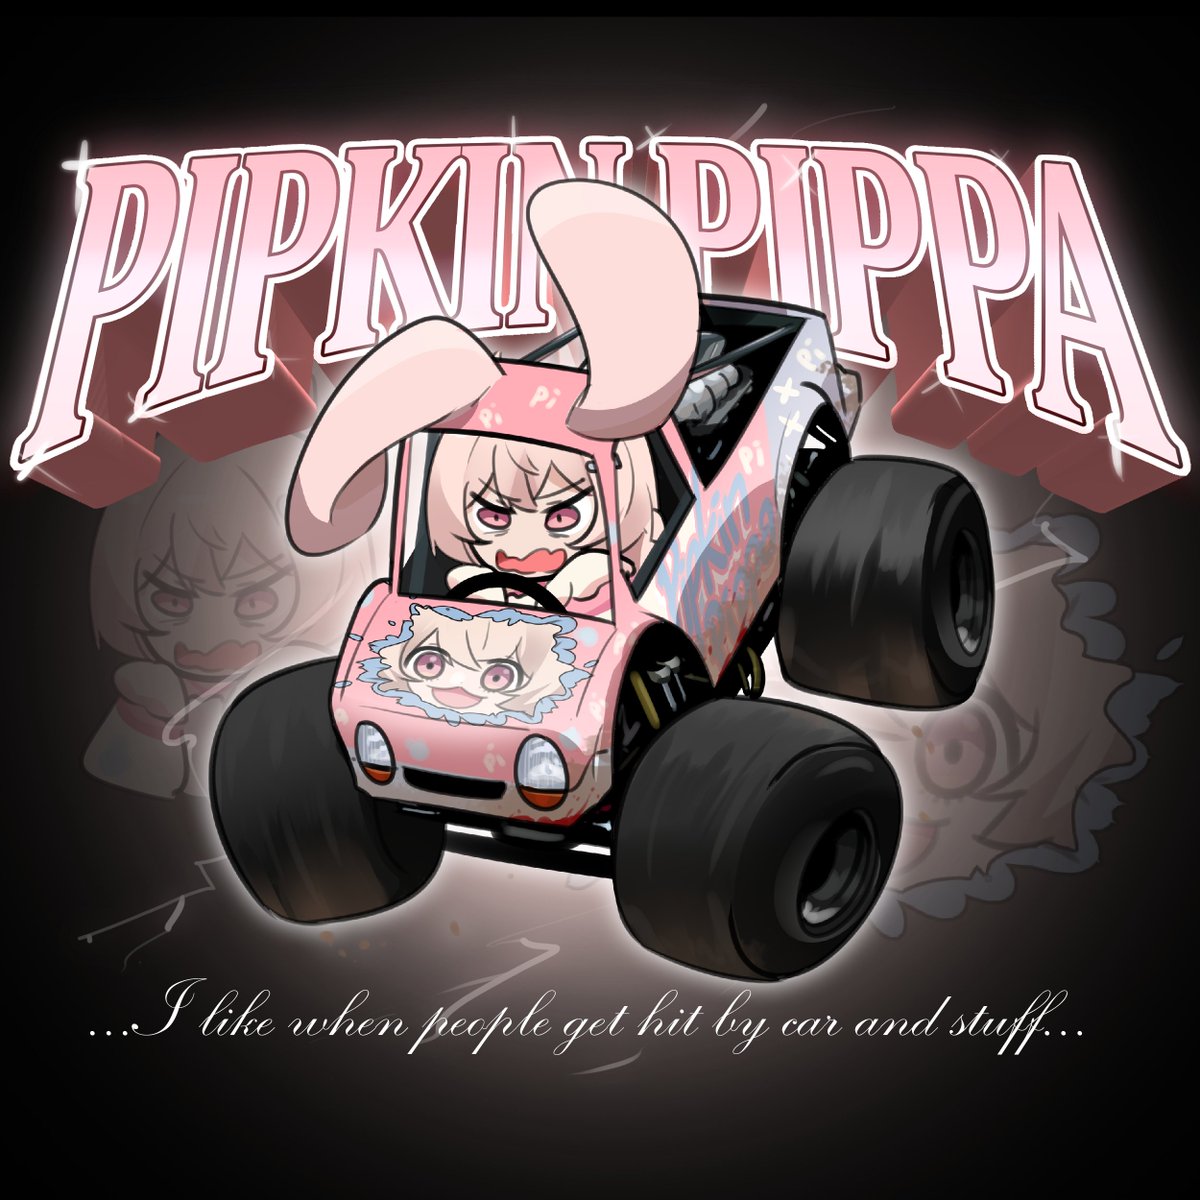 thank you s12 senpai (Again) for the commission of Pippa with her monster truck #MMOARTPG